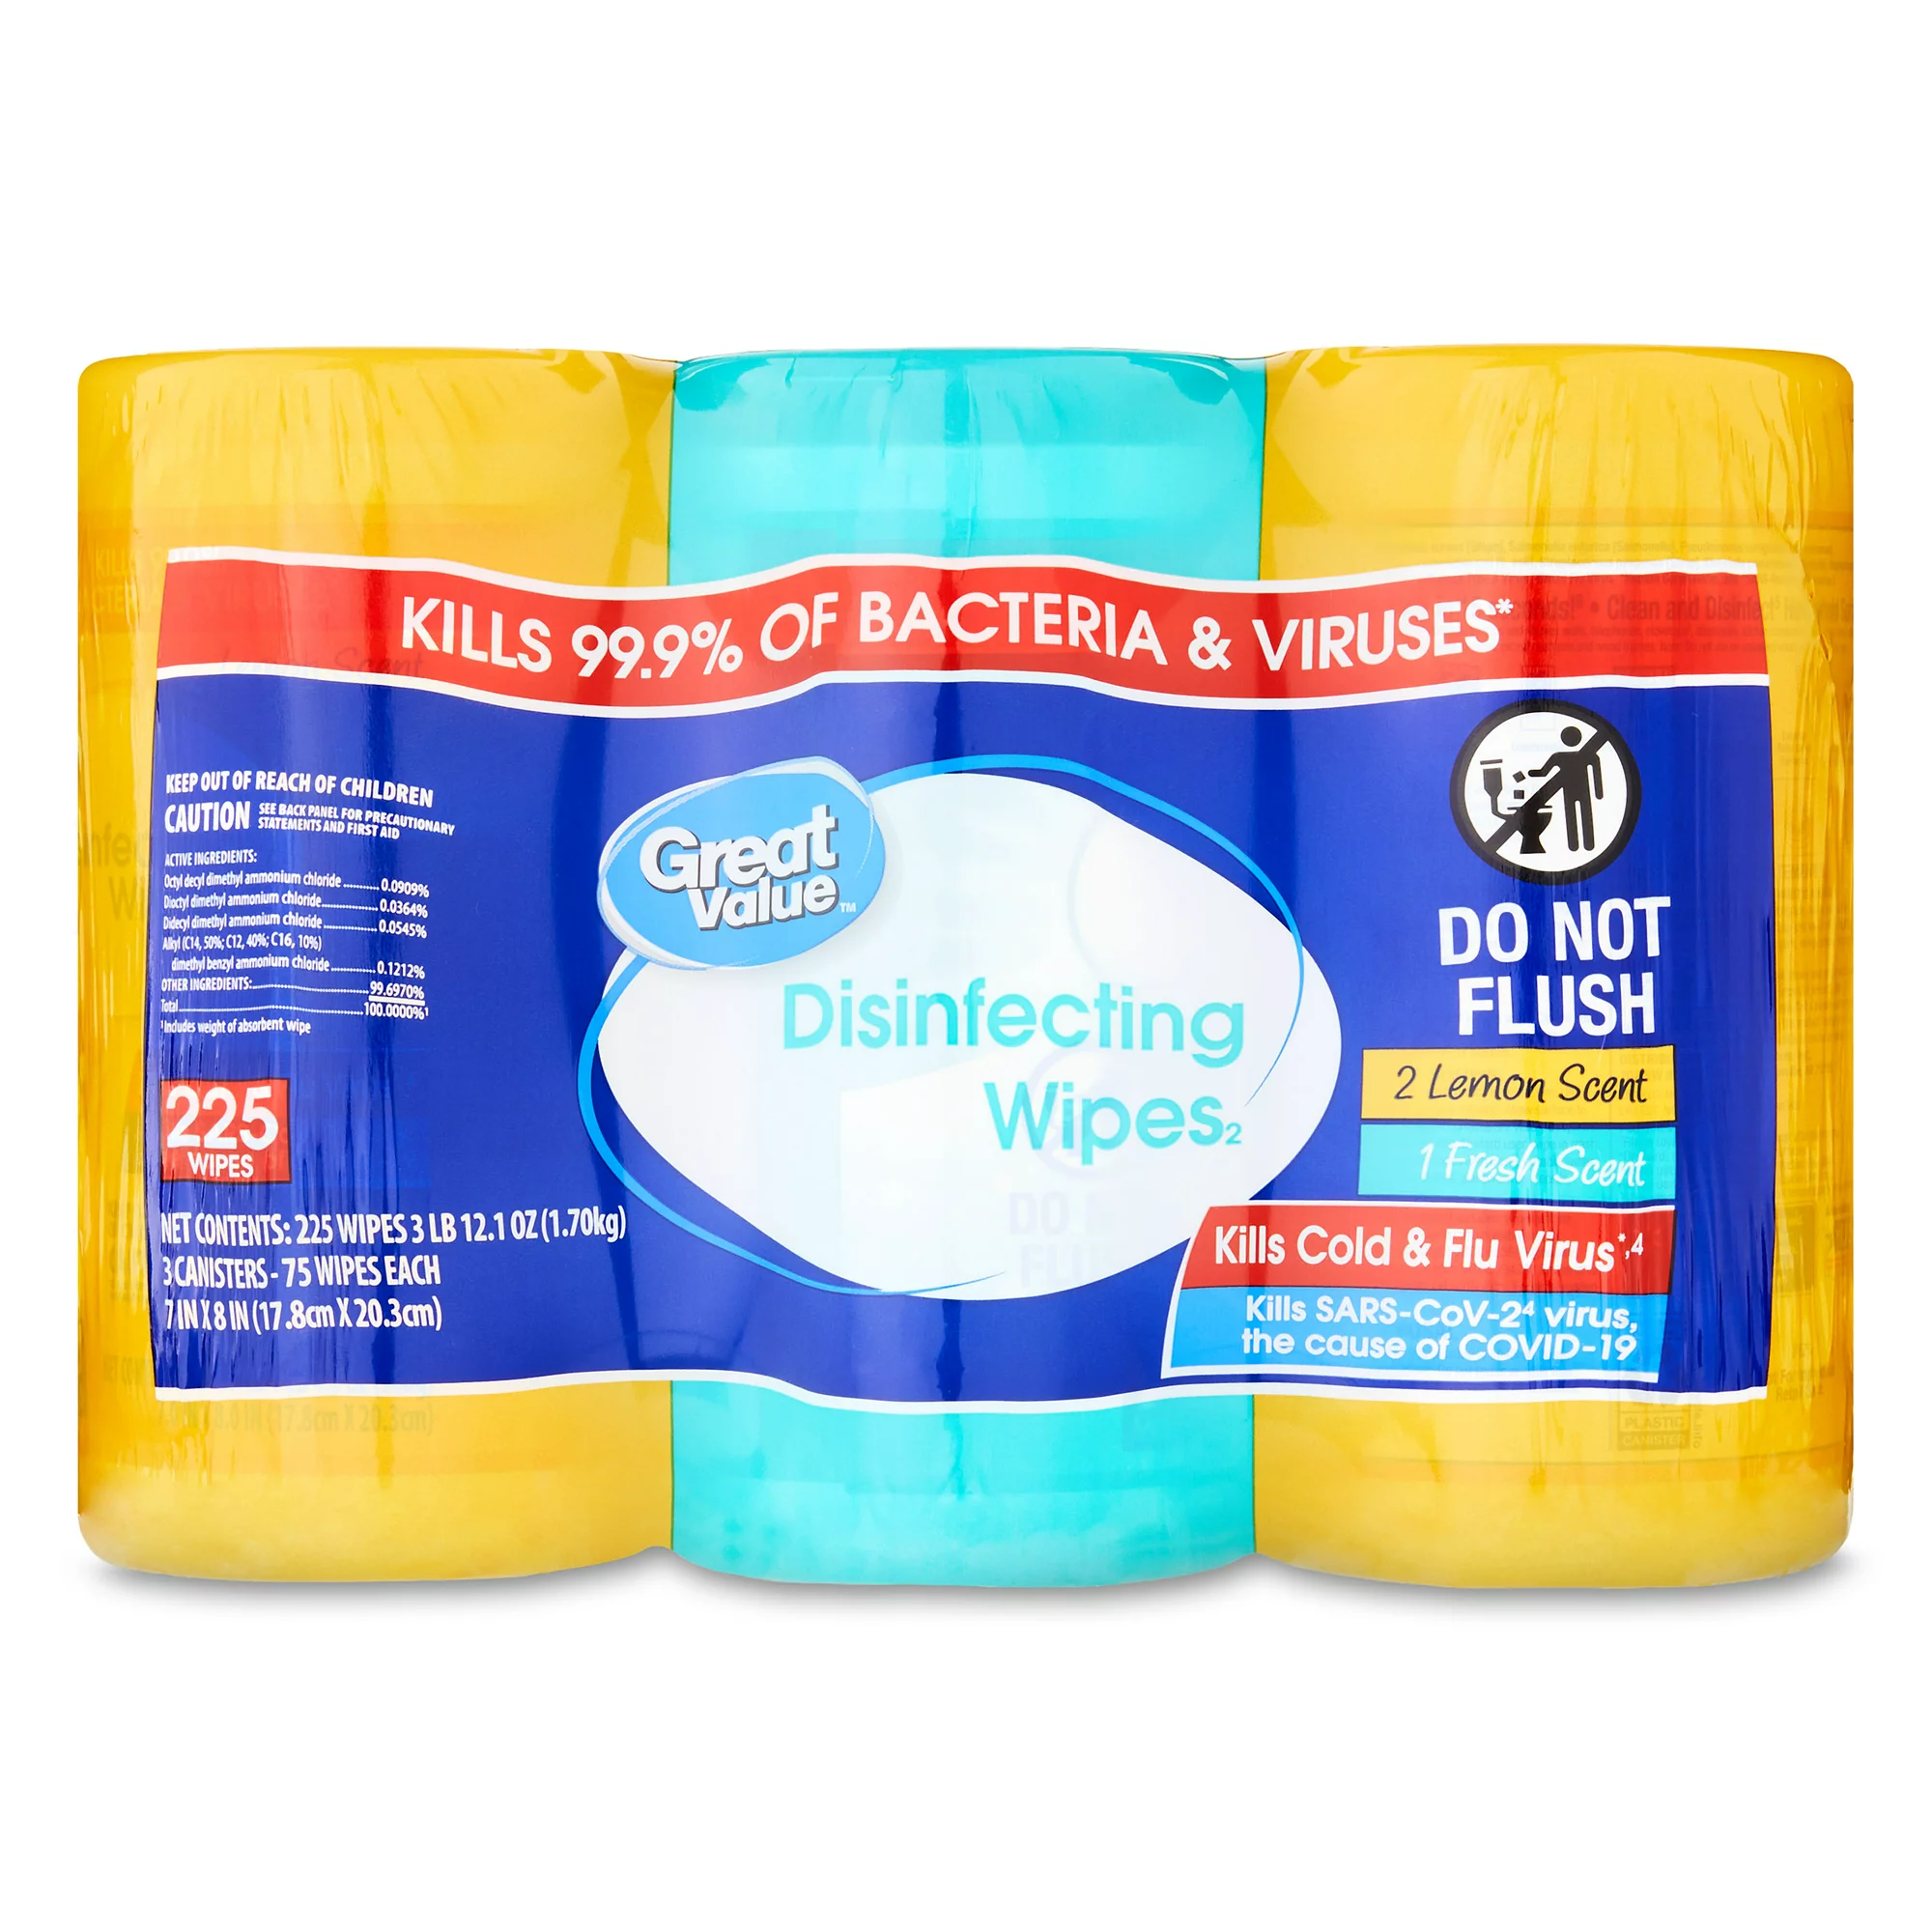 Great-Value-Disinfecting-Wipes-Fresh-and-Lemon-Scent-225-Wipes_8544587e-5bb3-4c19-9174-e178bb590ef7.062aeda27fa47e5e02ccee0bc6bcf7d3